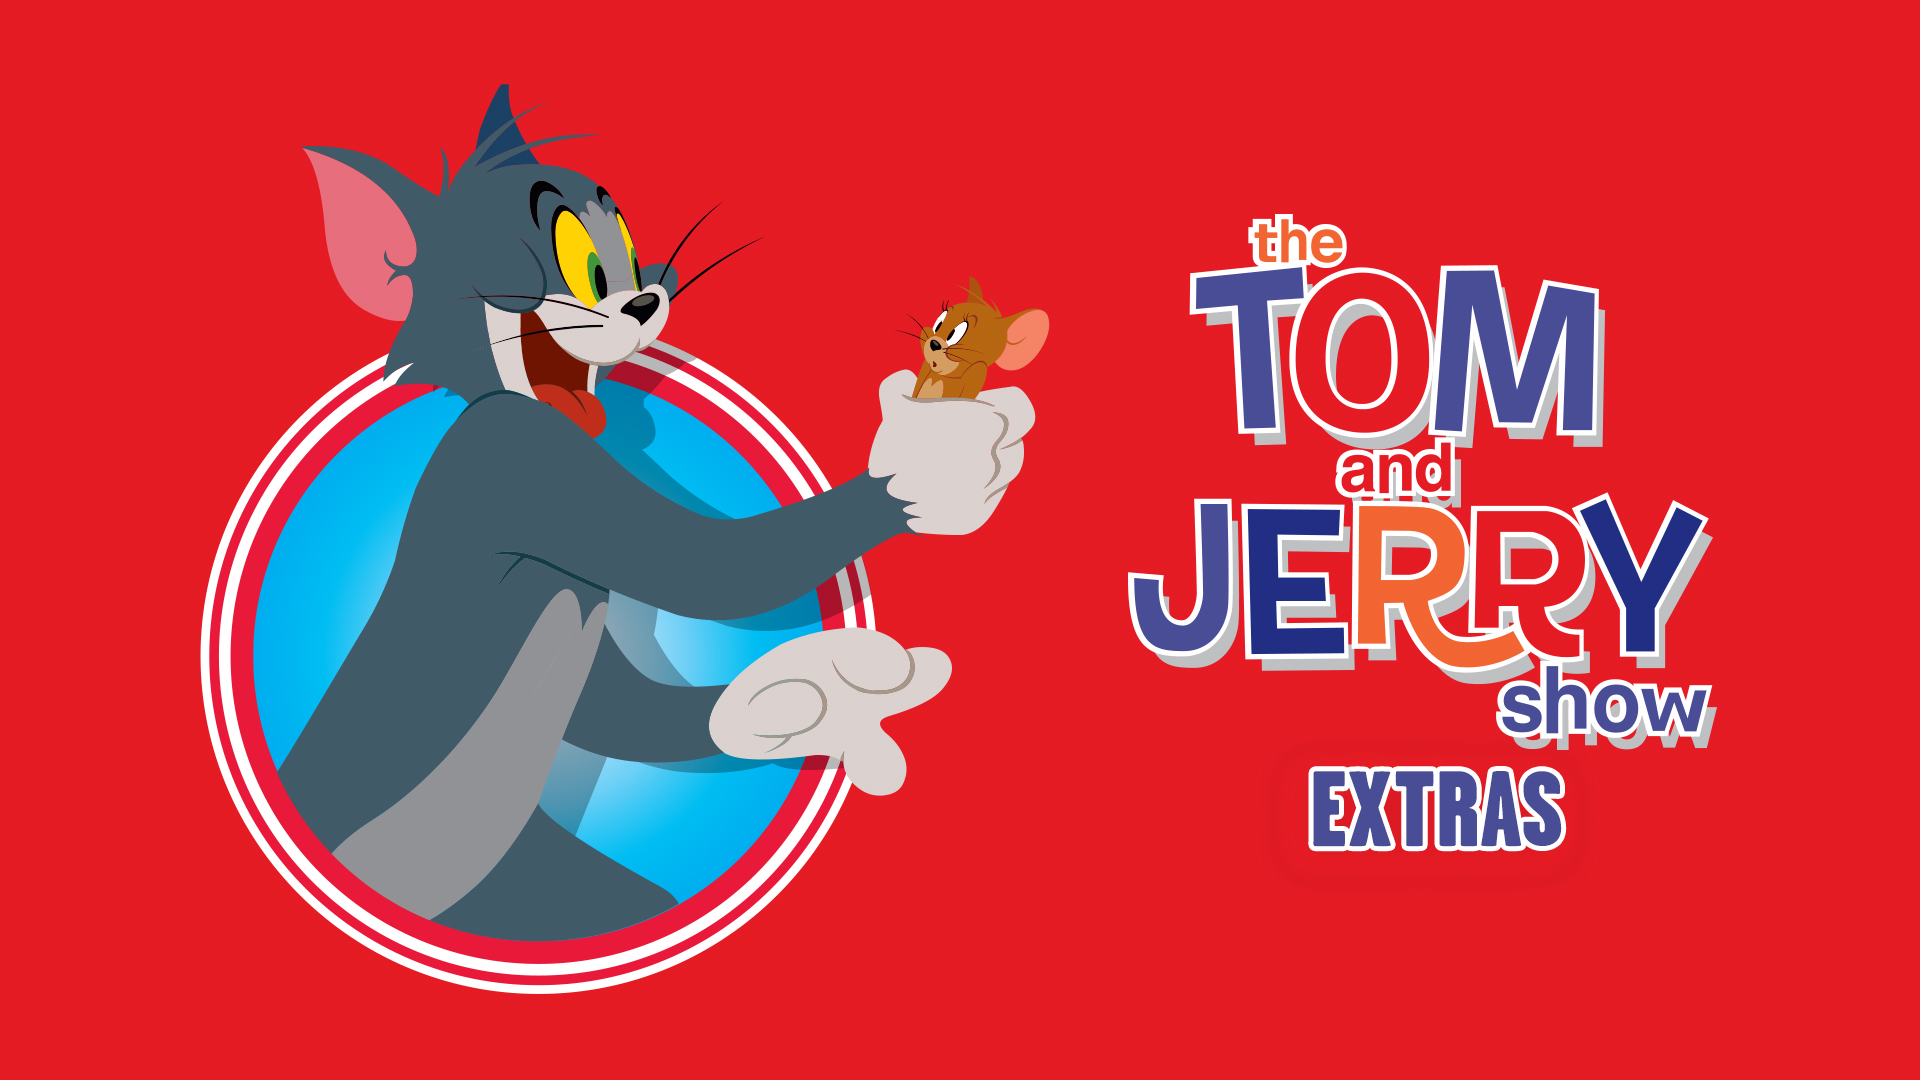 The Tom and Jerry Show: Extras. Season 1 Episode 5